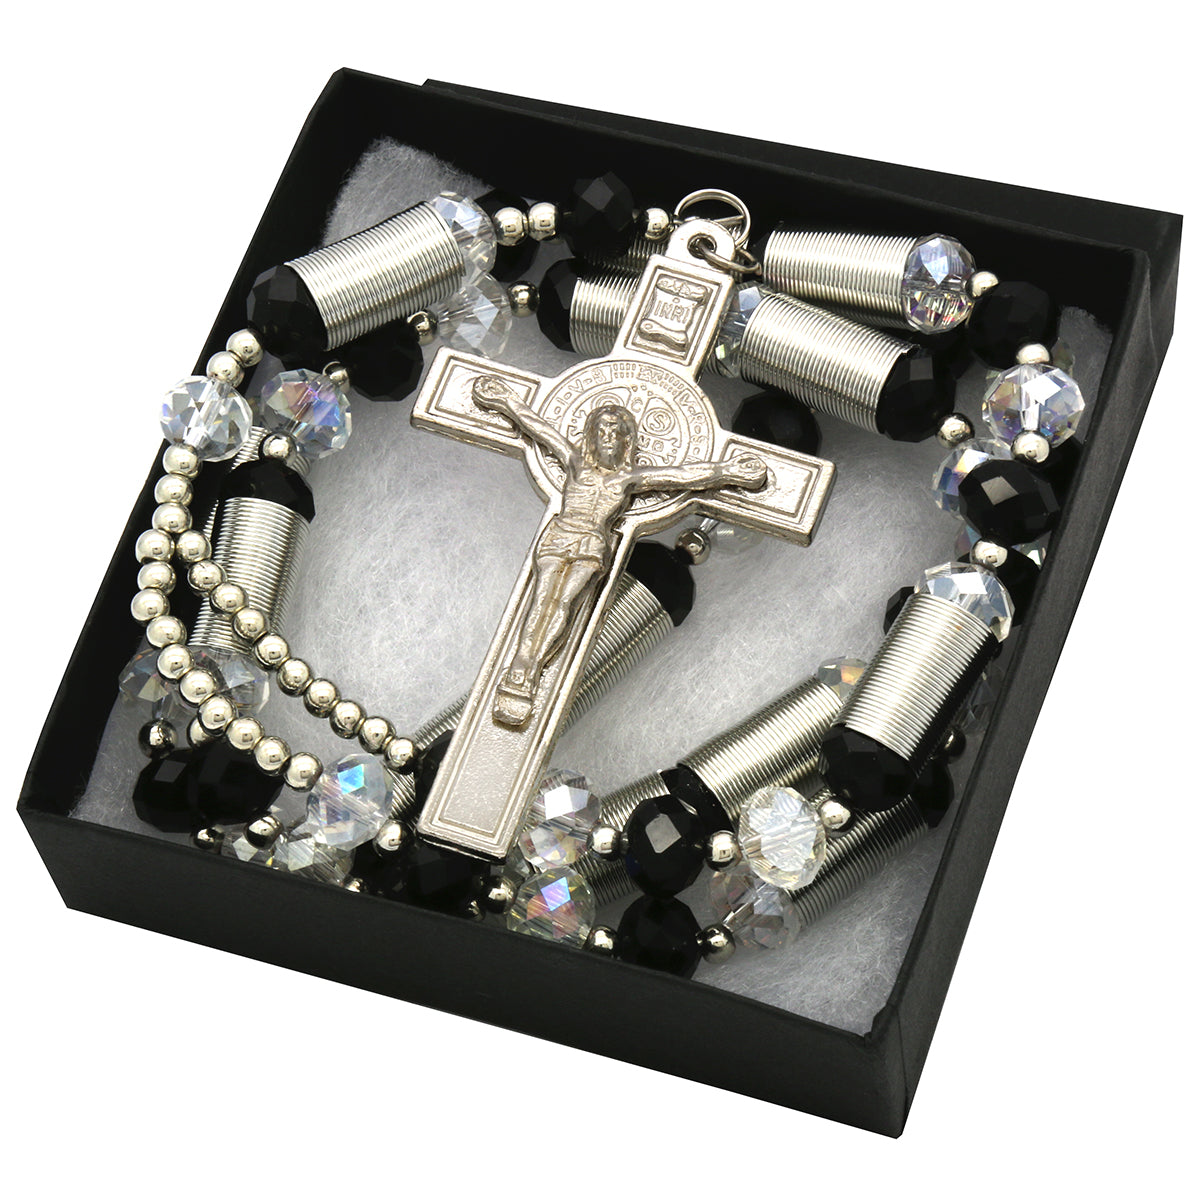 8MM Black/Clear Crystal Rosary With Cross Pendant